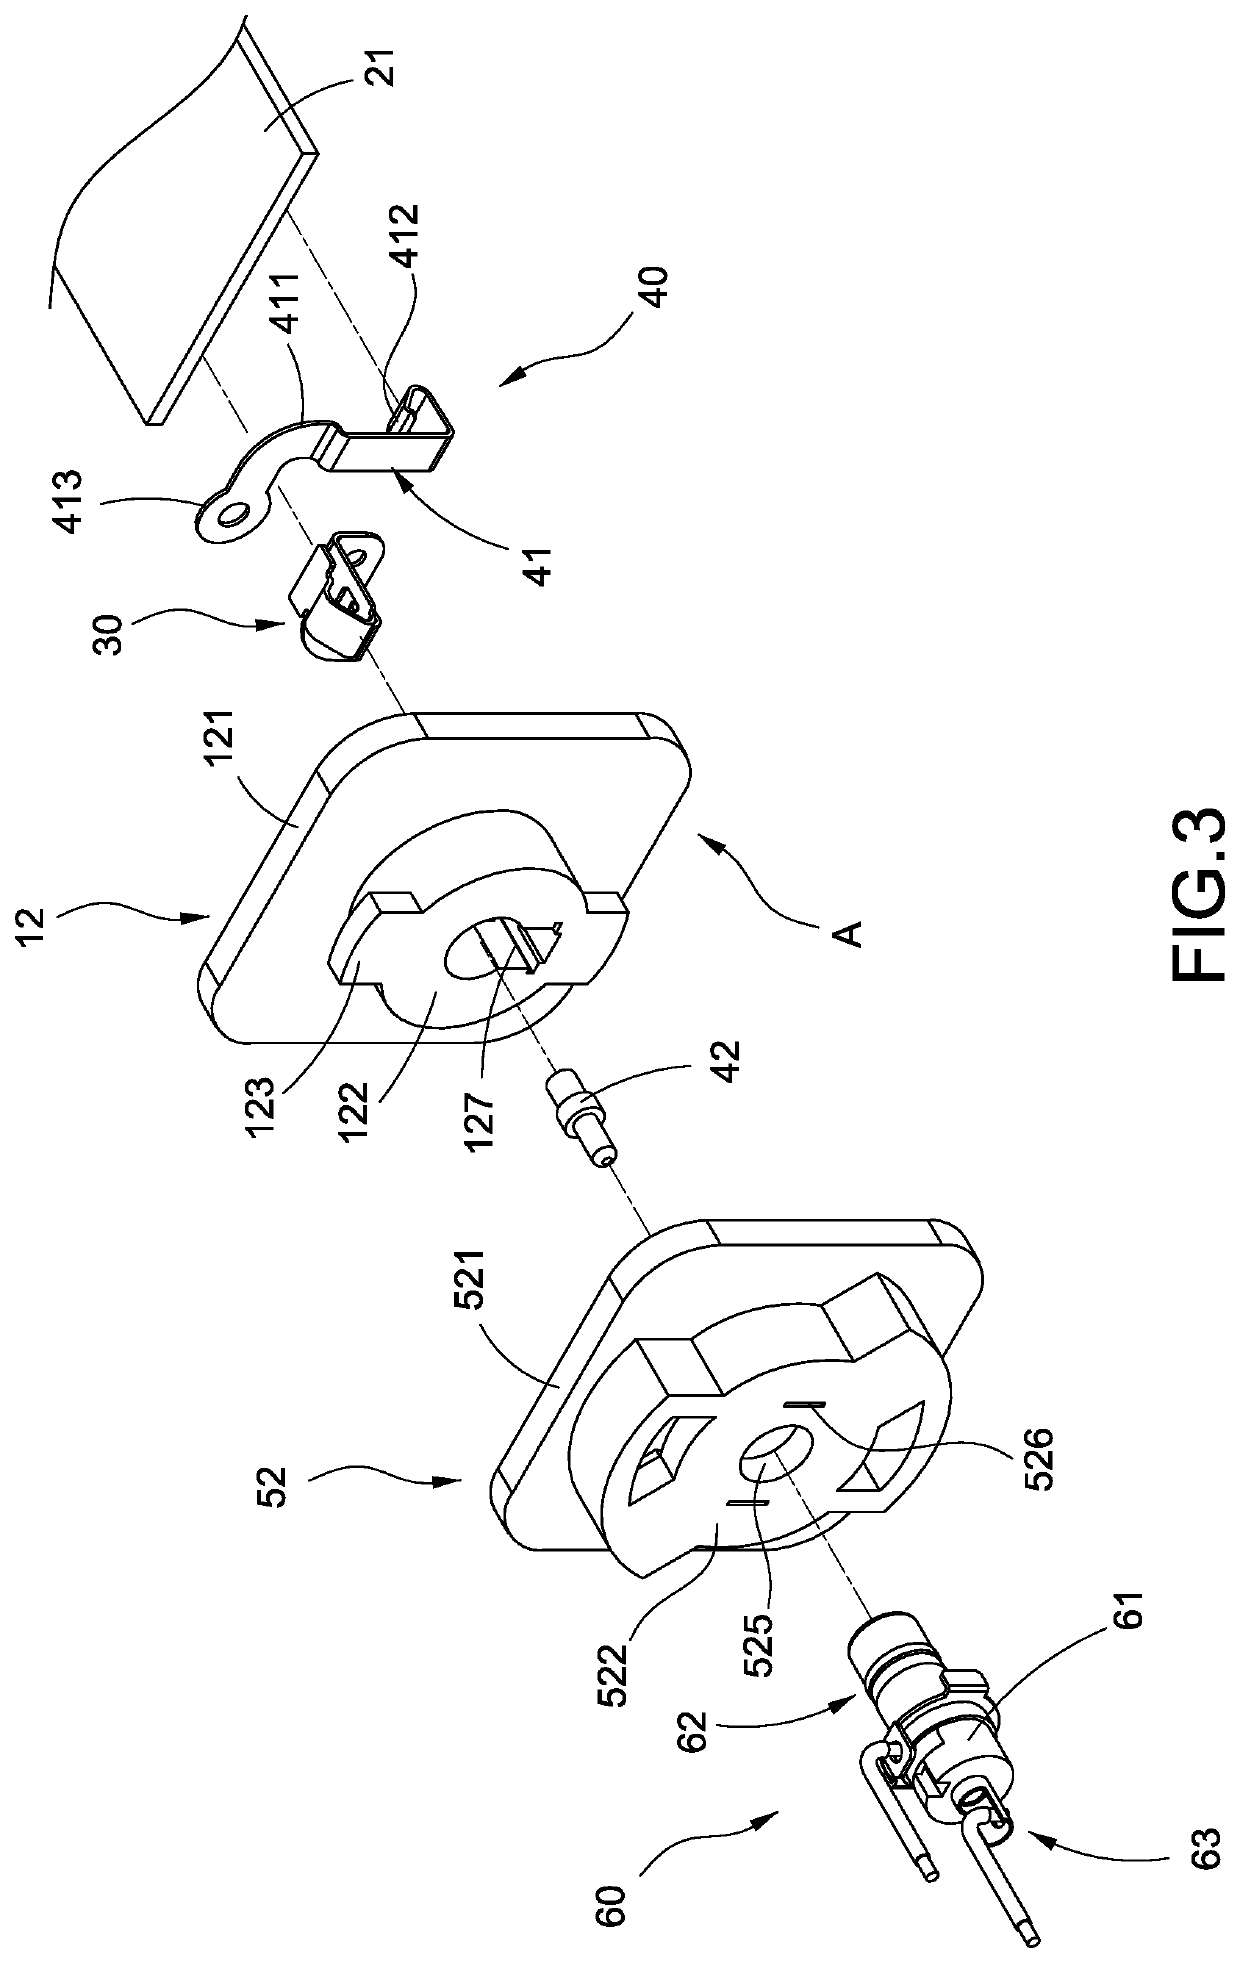 Interchangeable plug charger with coaxial conductive structure